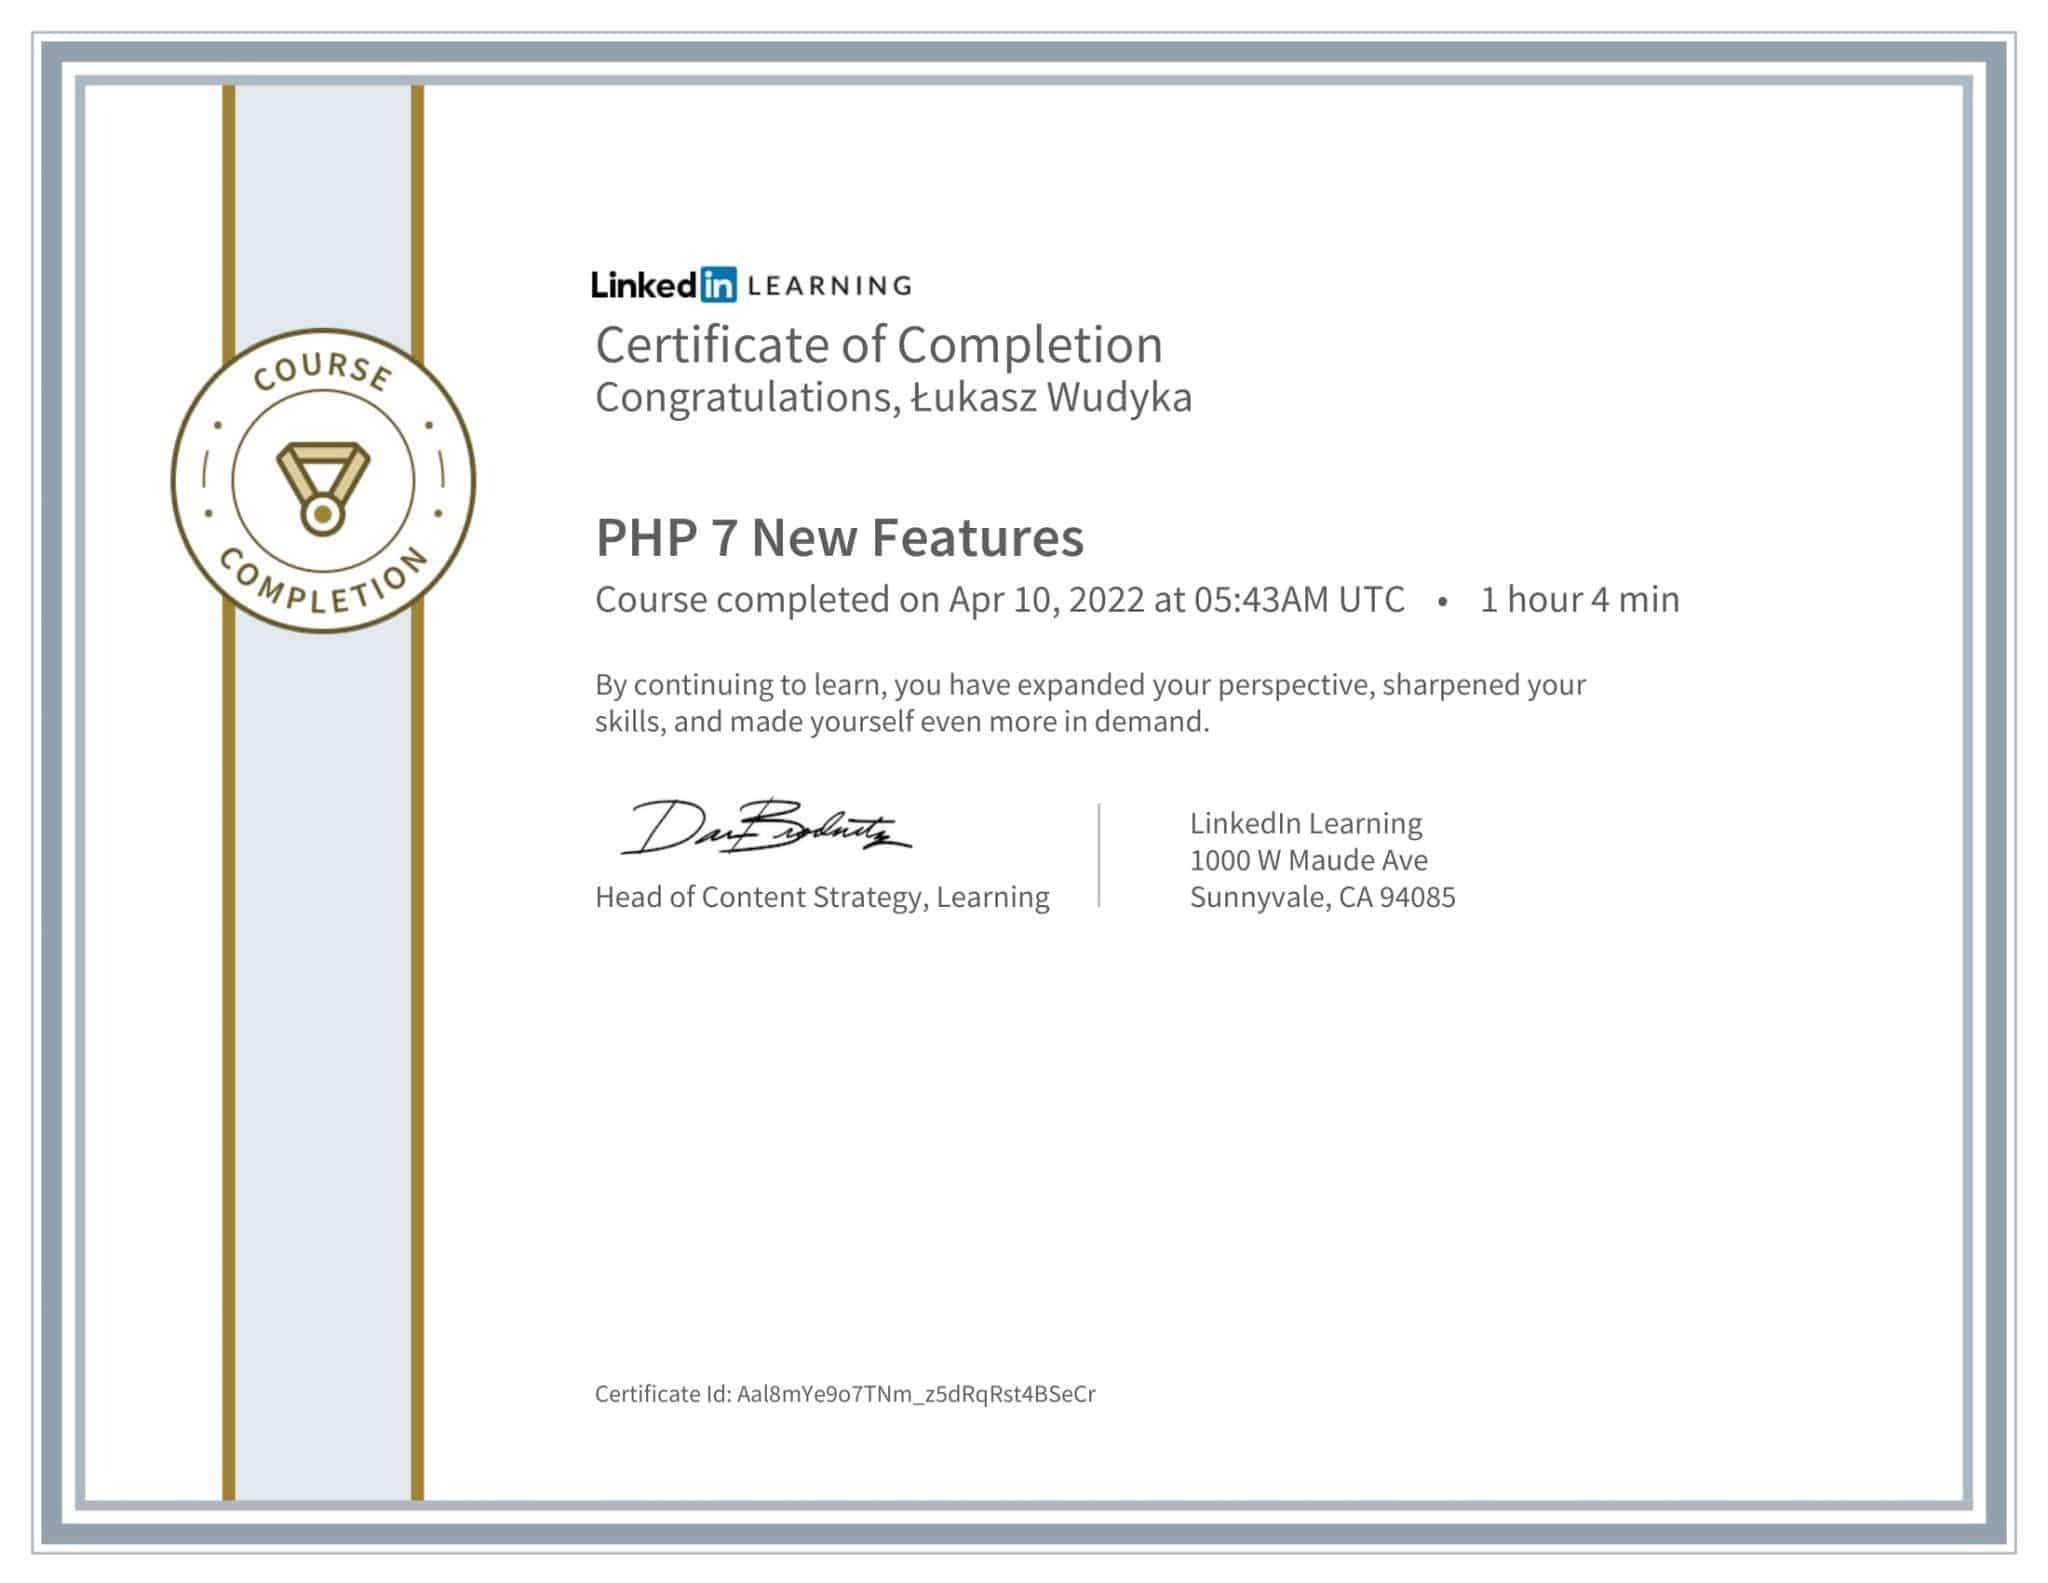 CertificateOfCompletion_PHP 7 New Features-1